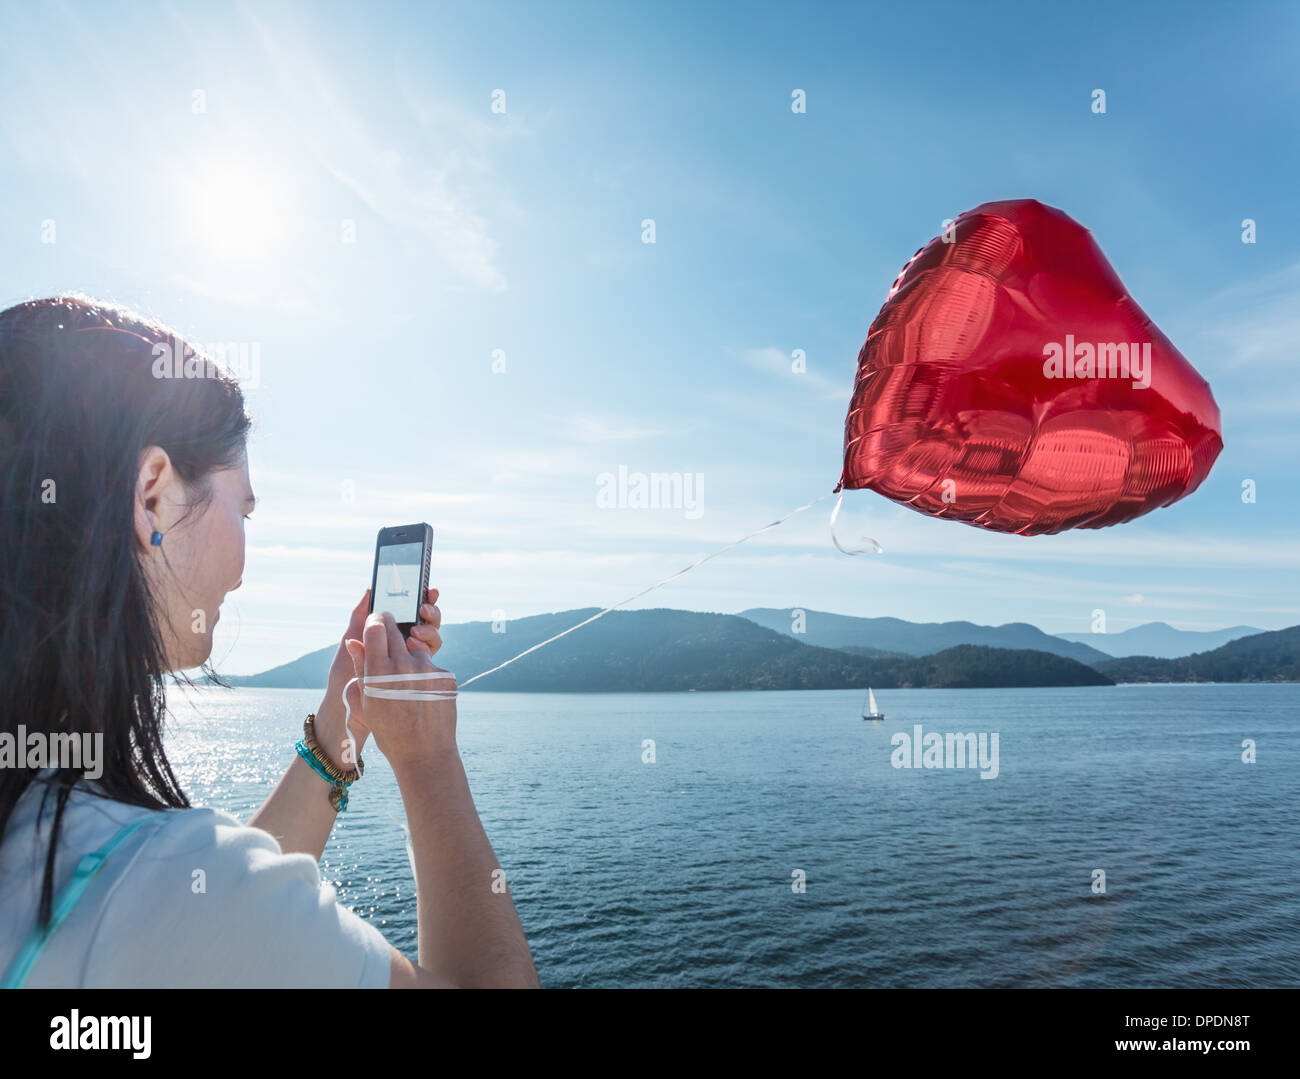 Mature woman photographing heart shaped balloon Stock Photo